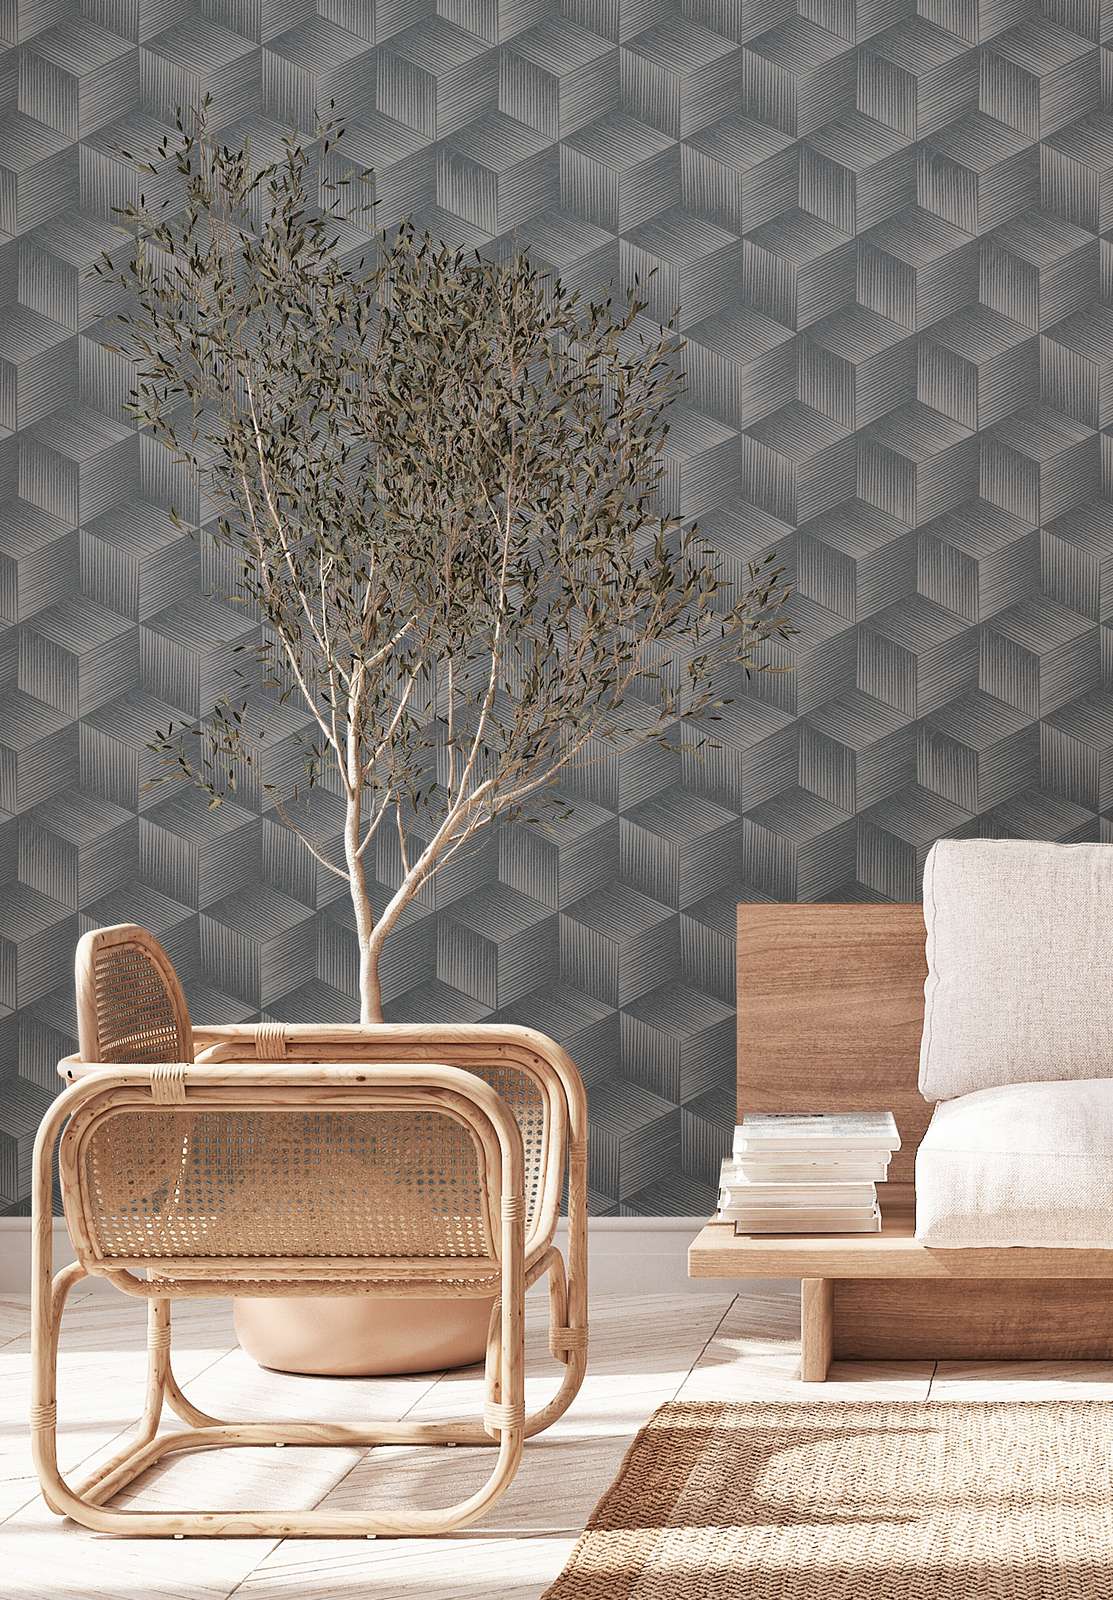             3D wallpaper with glitter effect and square pattern PVC-free - Black, Grey
        